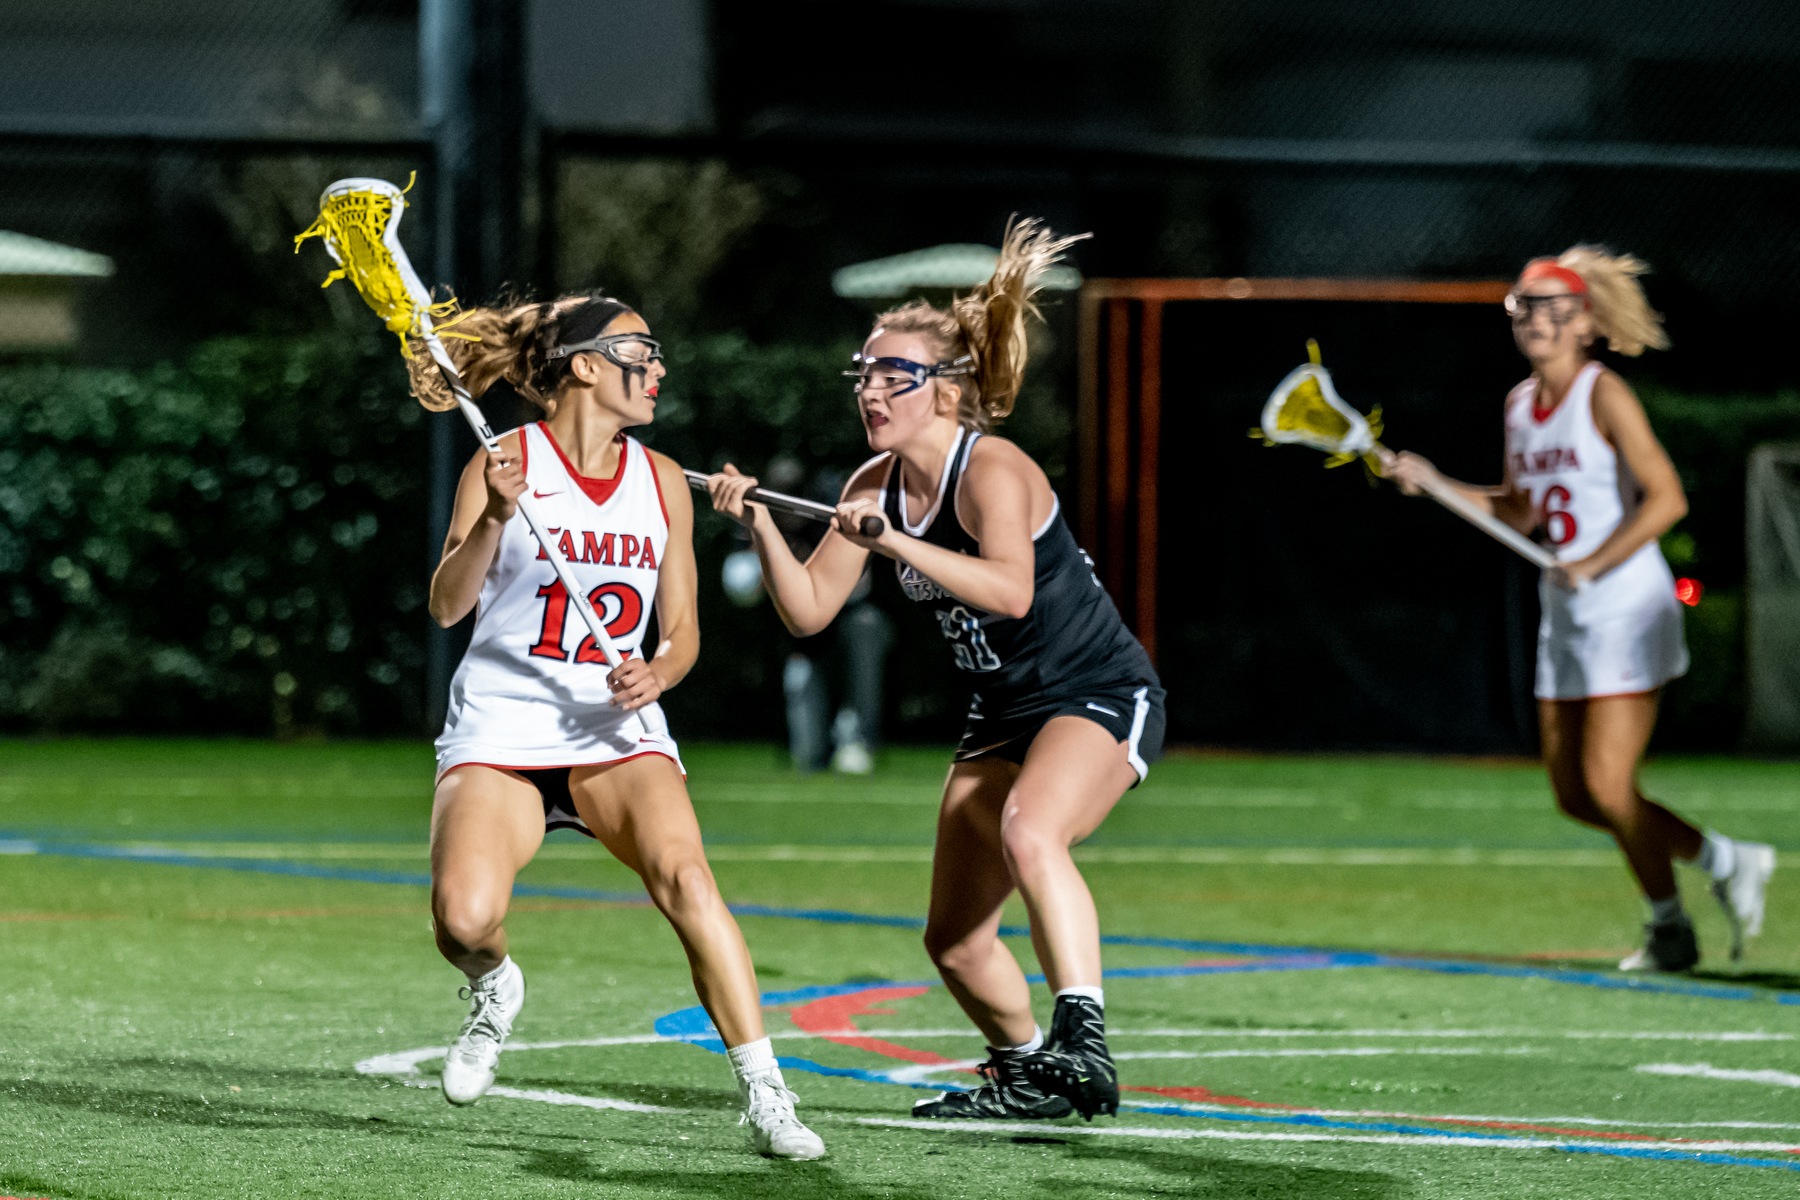 Women's Lacrosse Clobber Wolves in First Road Game of the Season